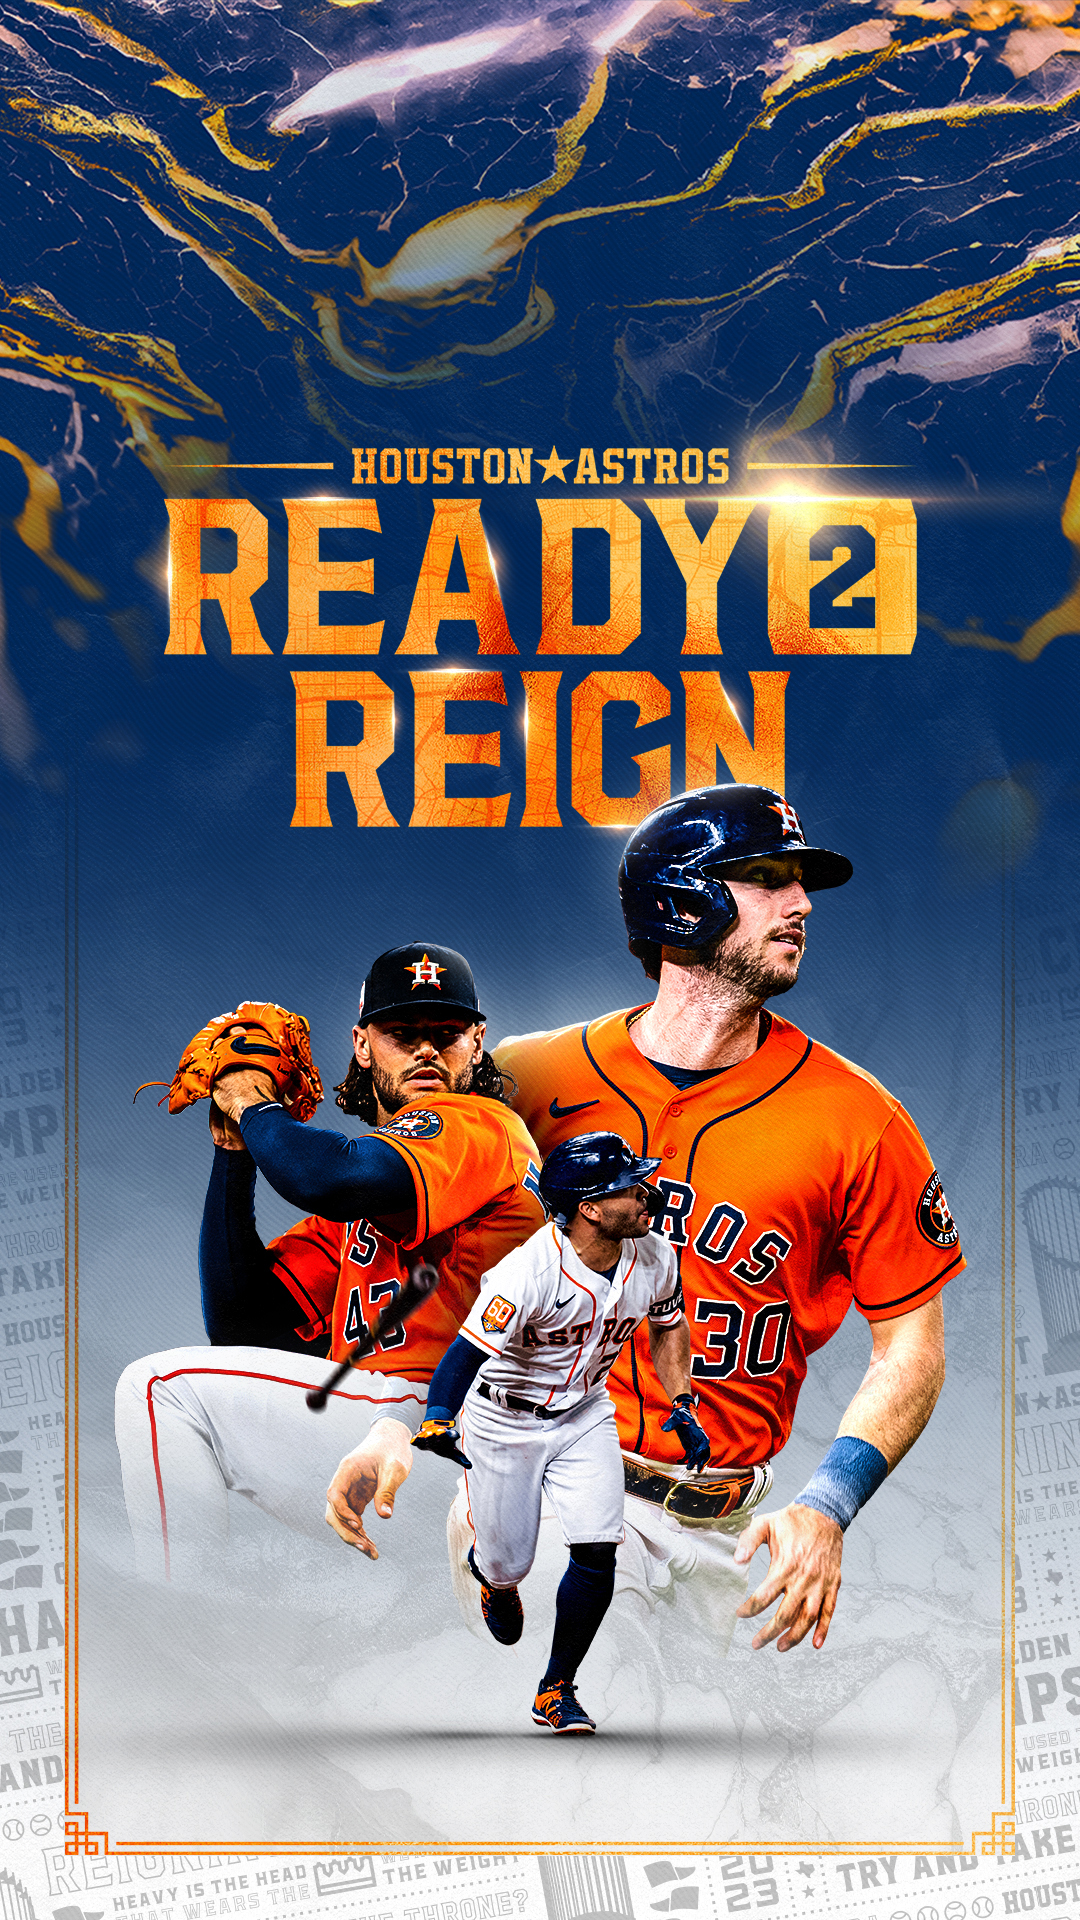 Download Houston Astros wallpaper by Chrisjm3 - 6486 - Free on ZEDGE™ now.  Browse millions of popular astros Wa…